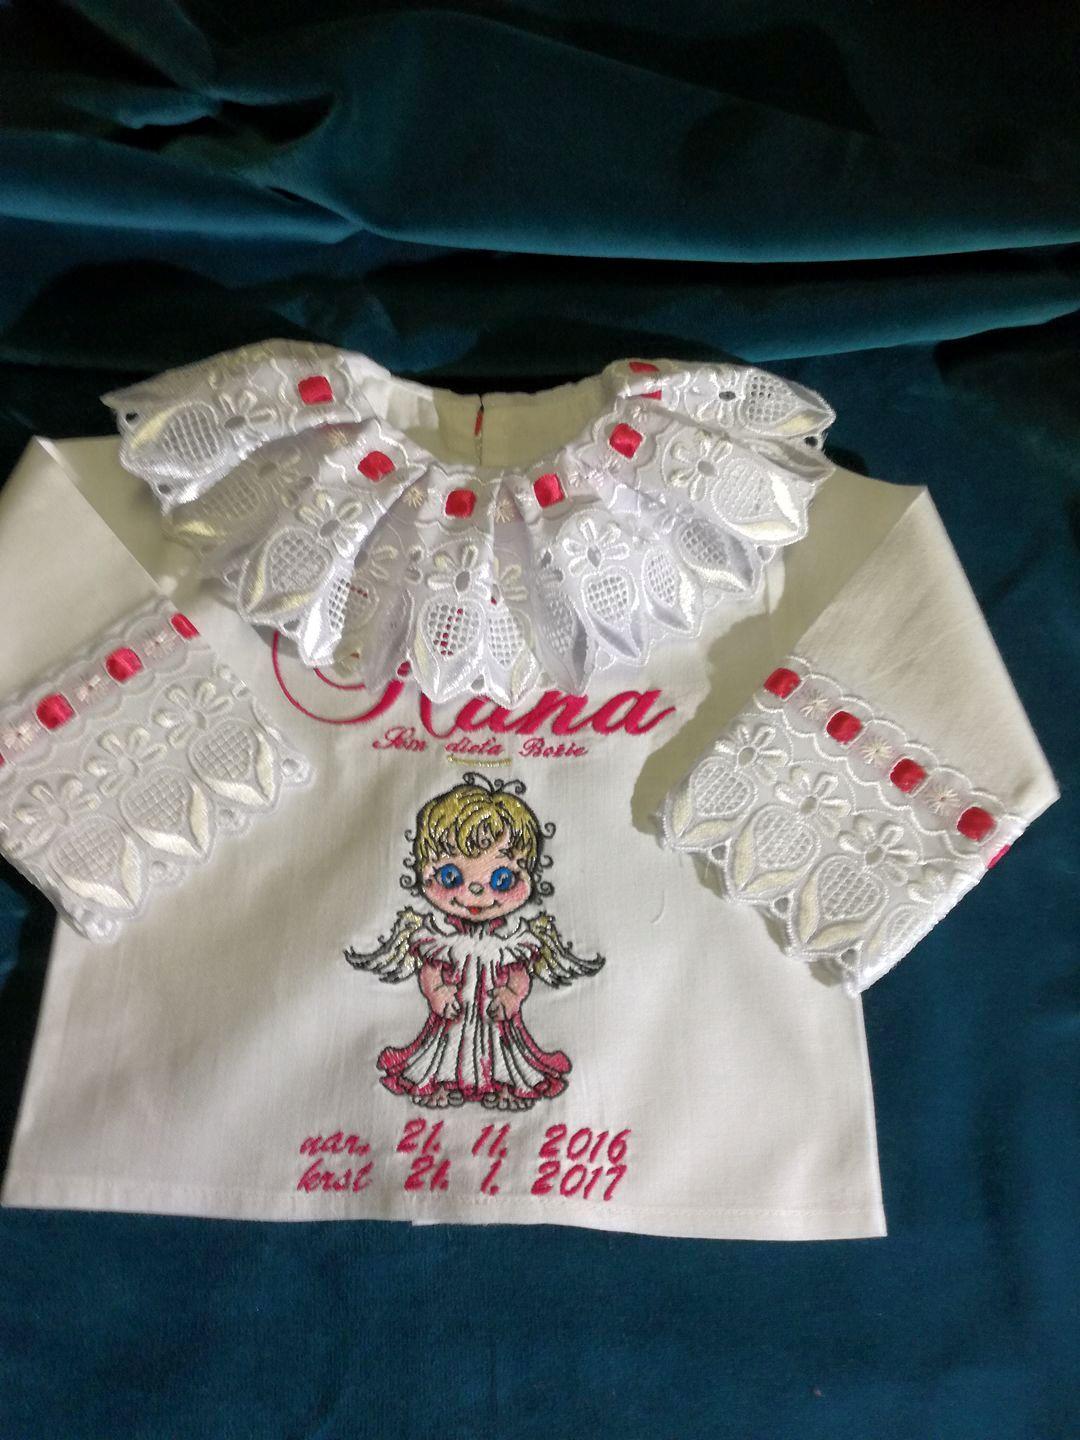 Embroidered christening dress with cute angel design